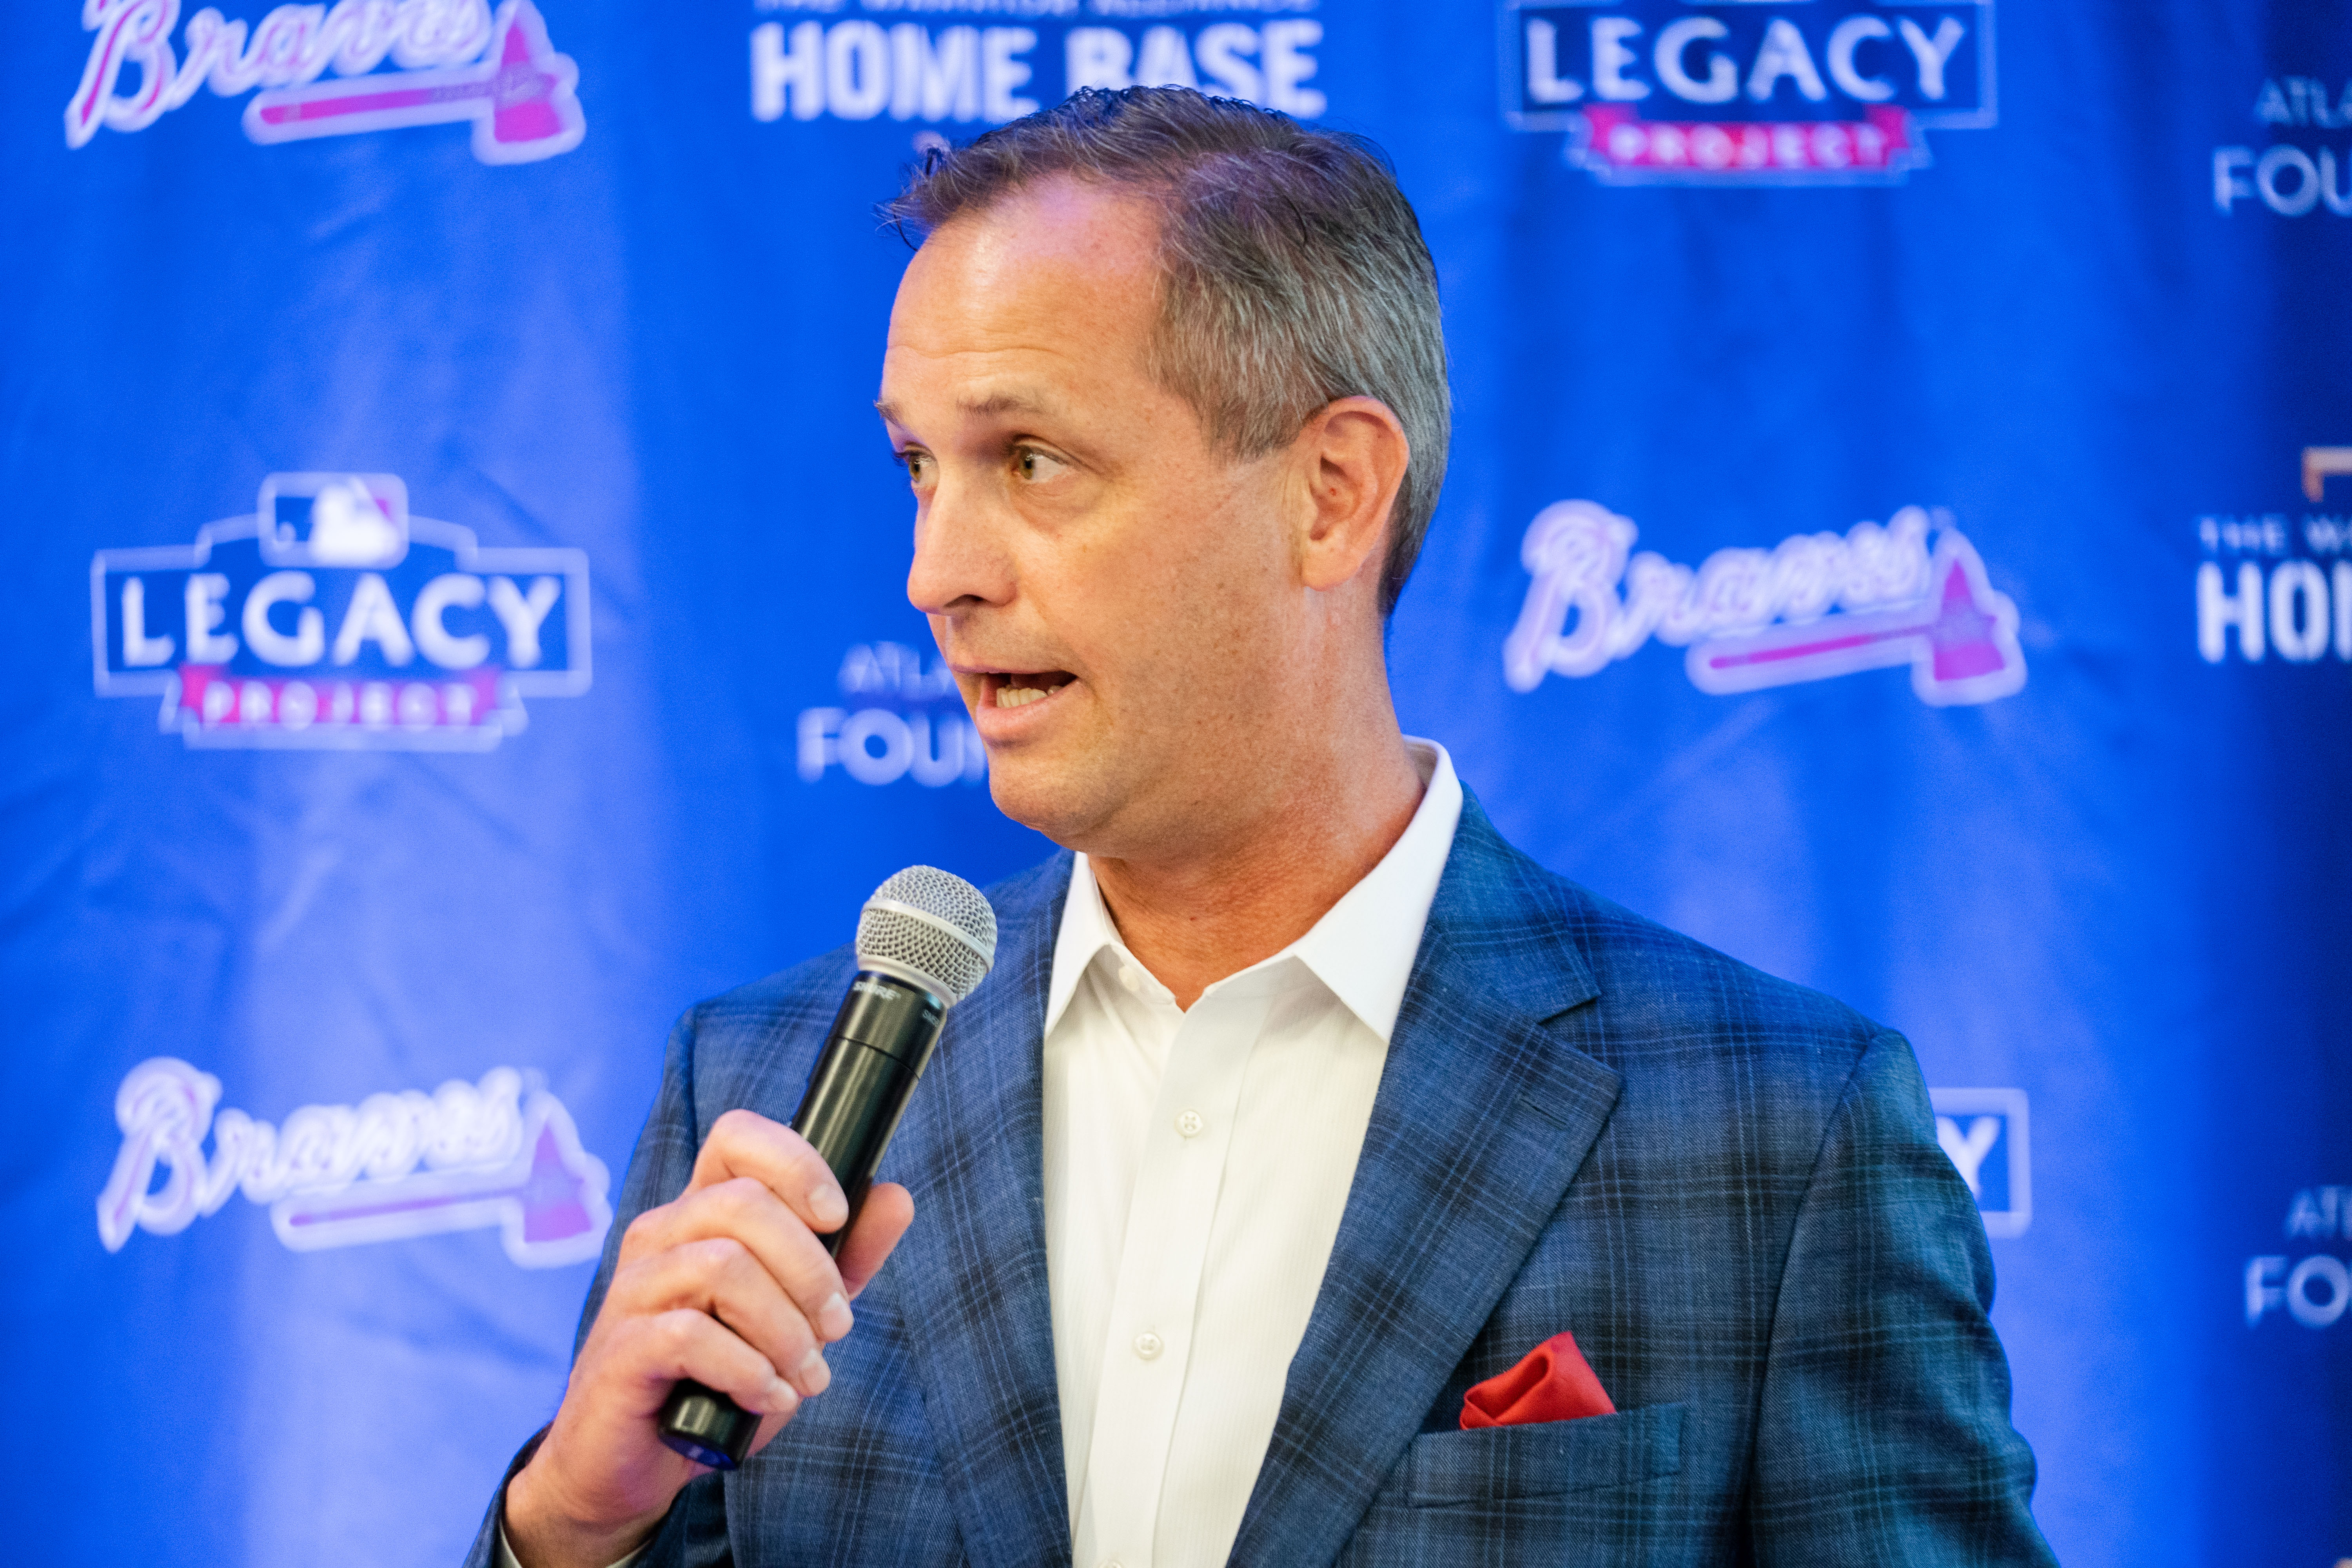 Braves CEO Derek Schiller has World Series ring and plans to lure fans